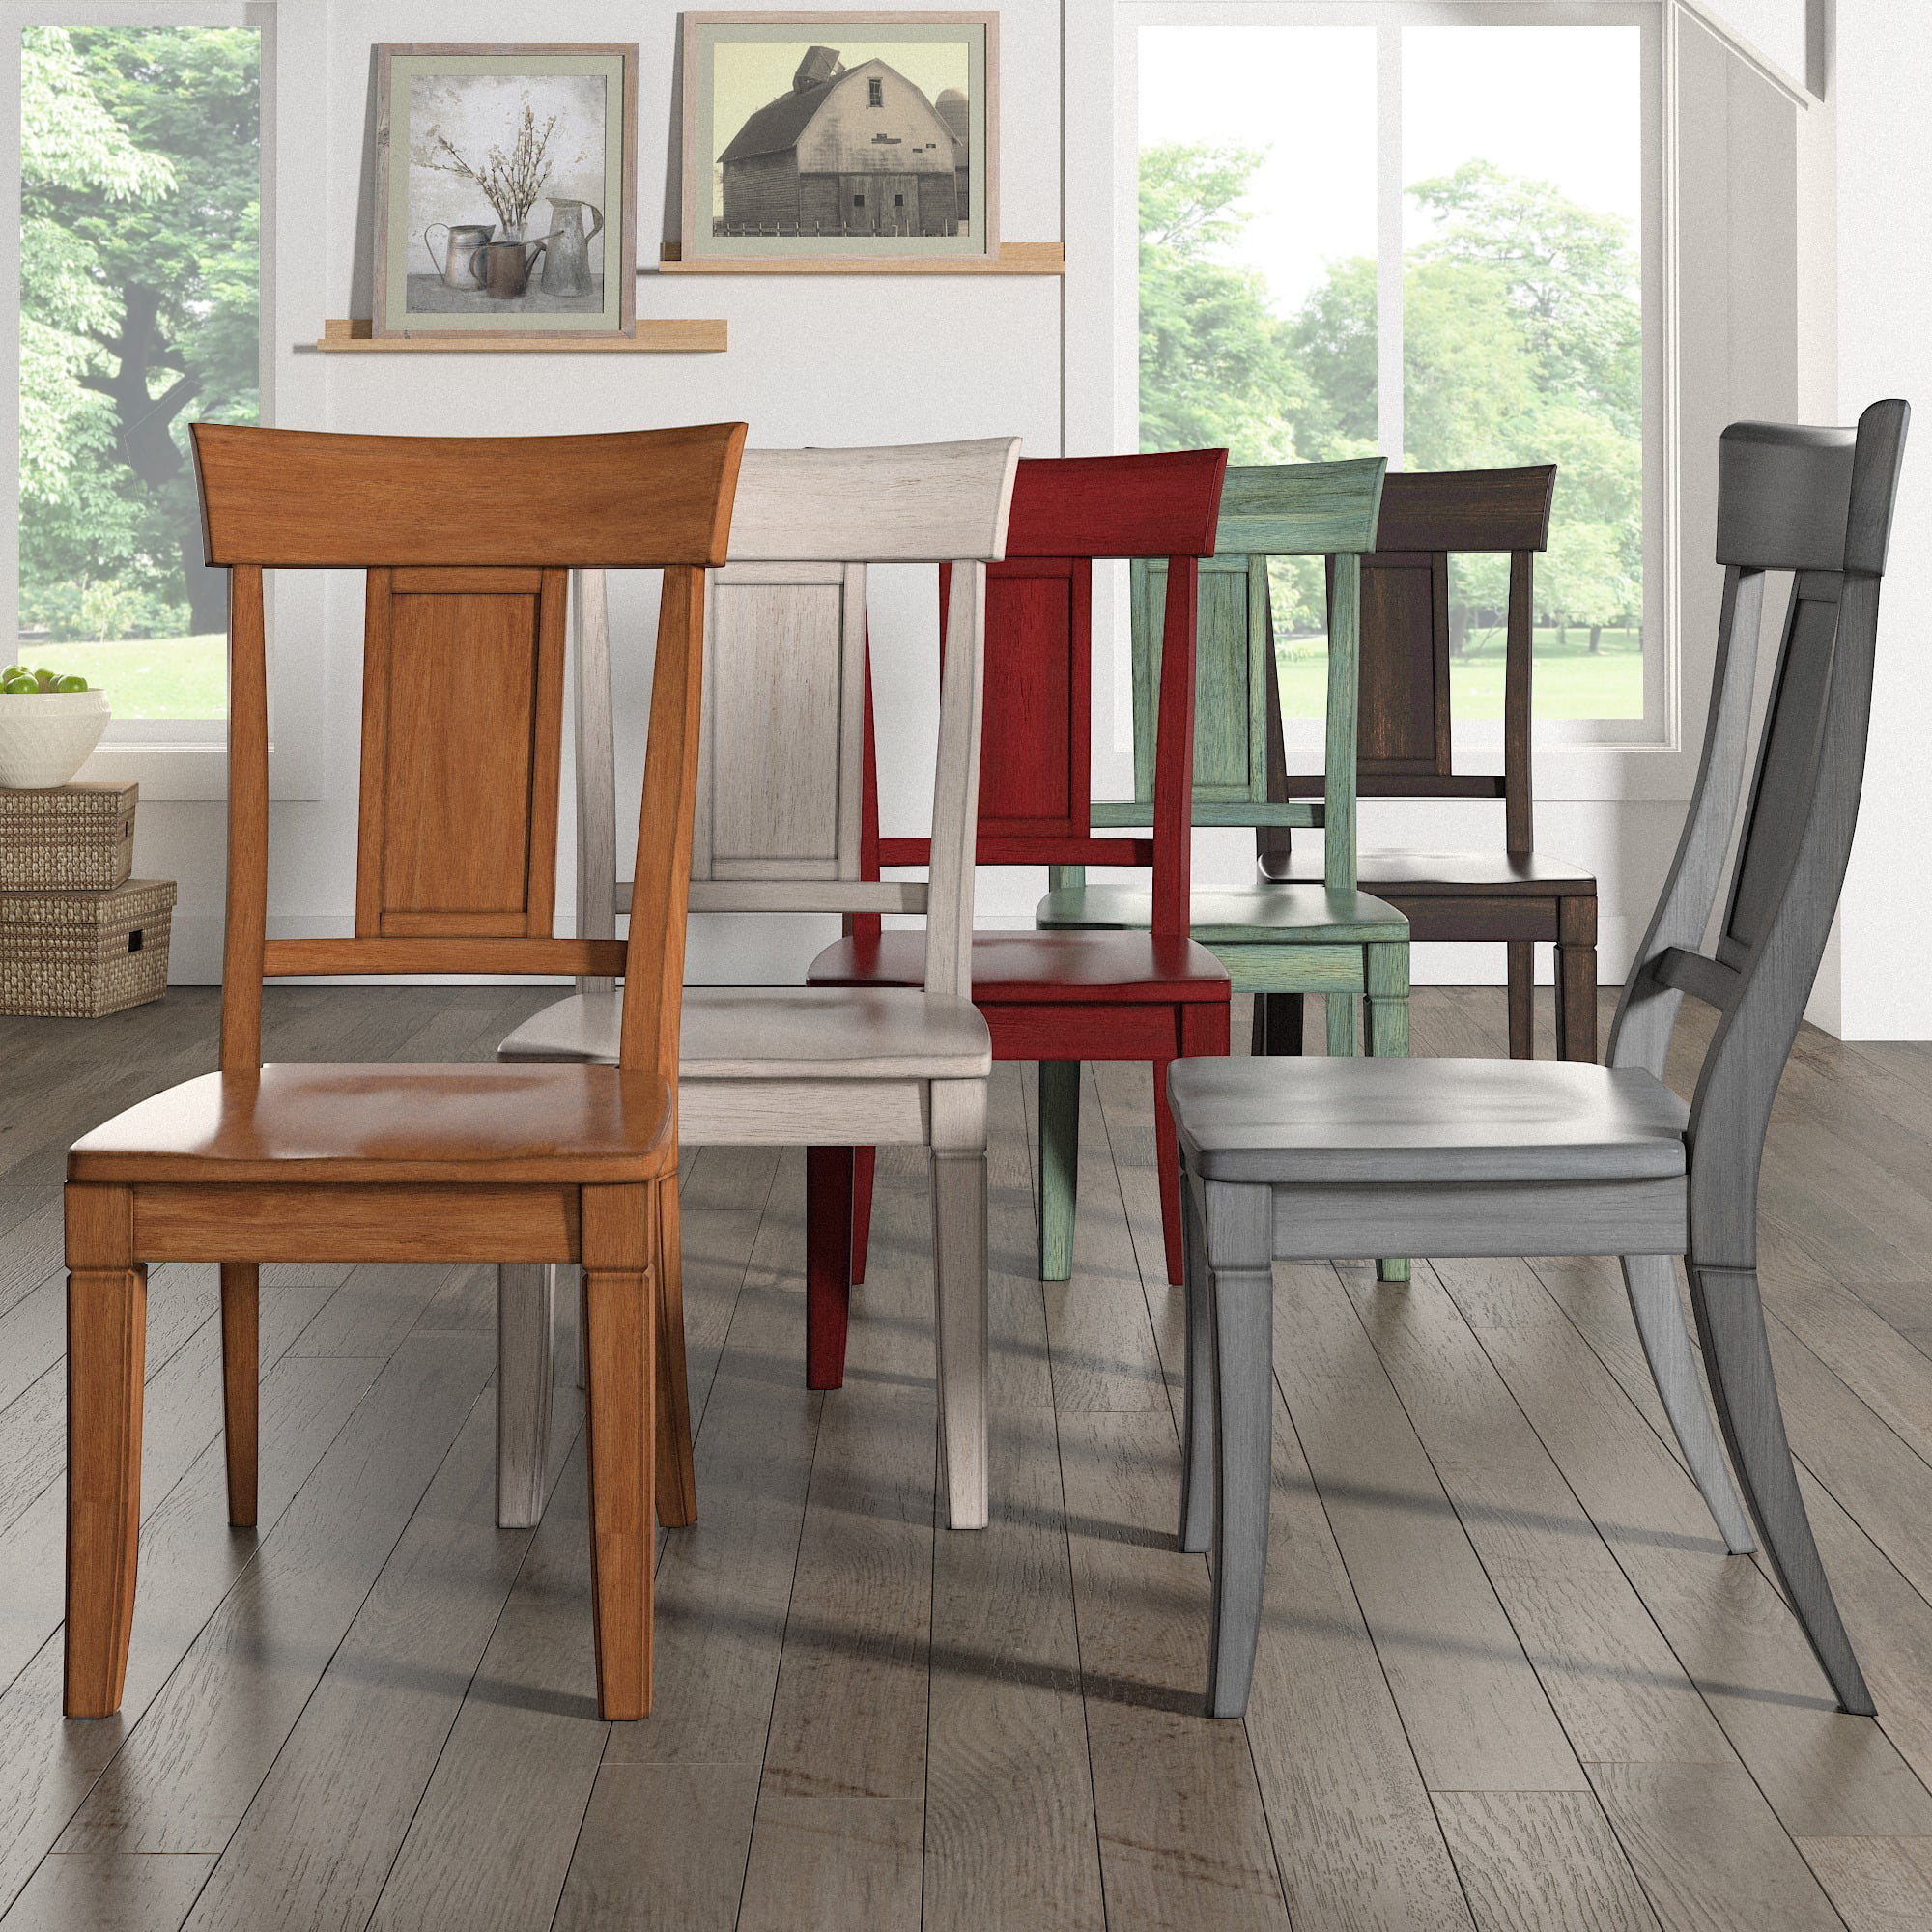 iNSPIRE Q Eleanor Panel Back Wood Dining Chair (Set of 2) by Classic ...